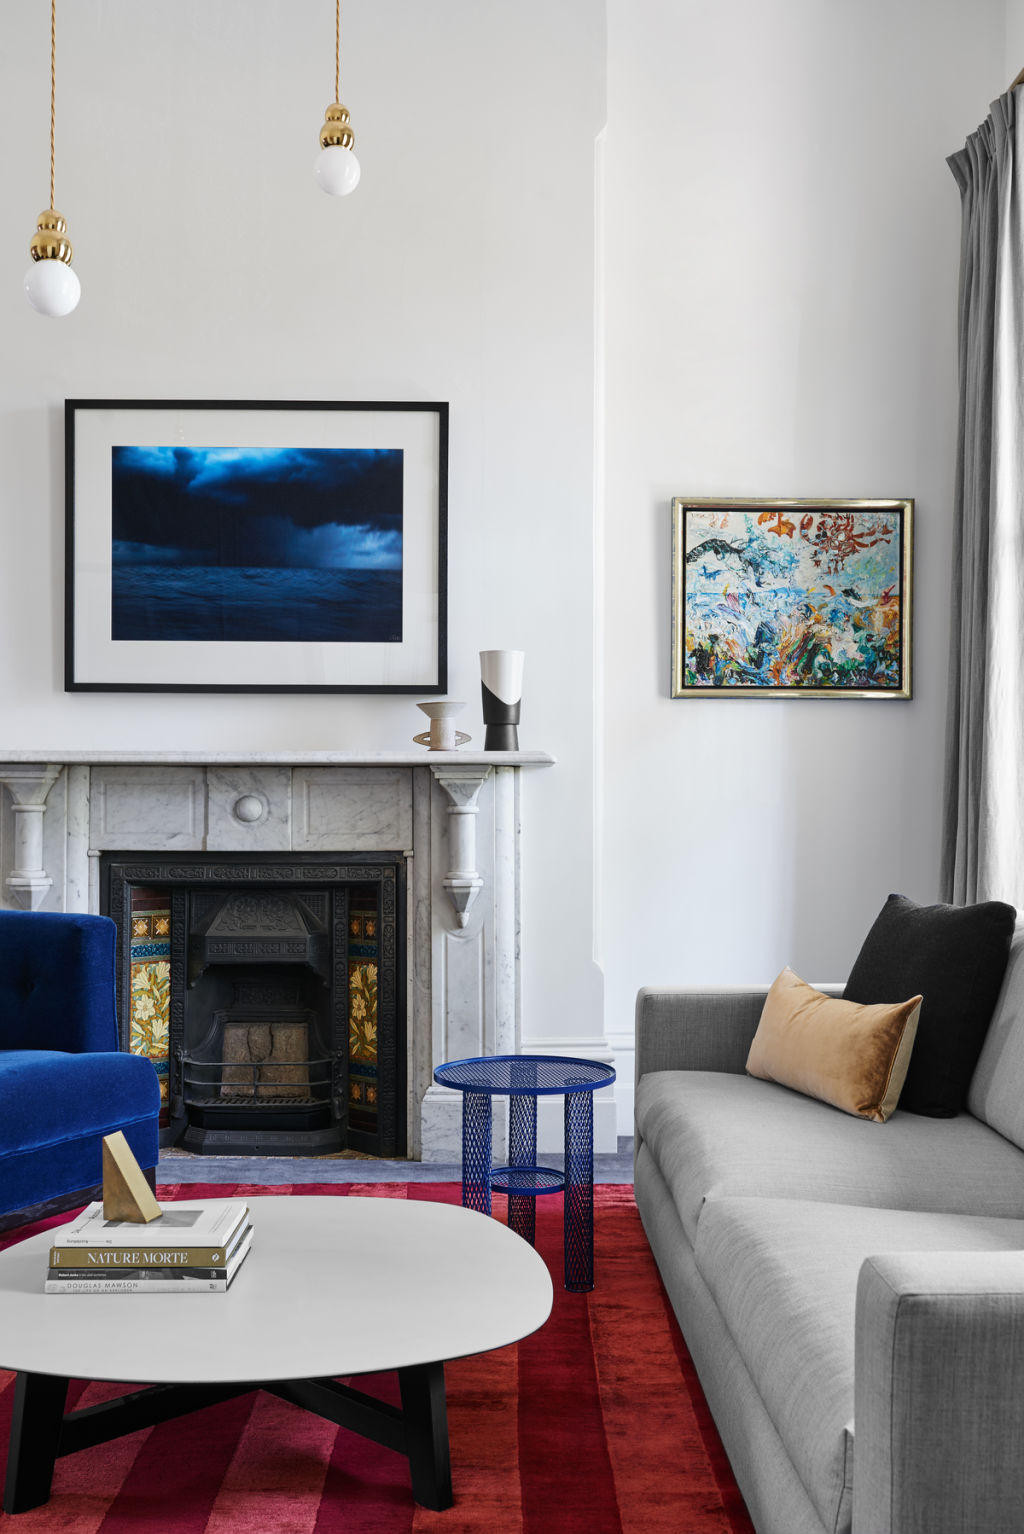 Simple forms in the original rooms, including the home’s existing fireplace, offer a sense of calm.  Photo: Dan Hocking